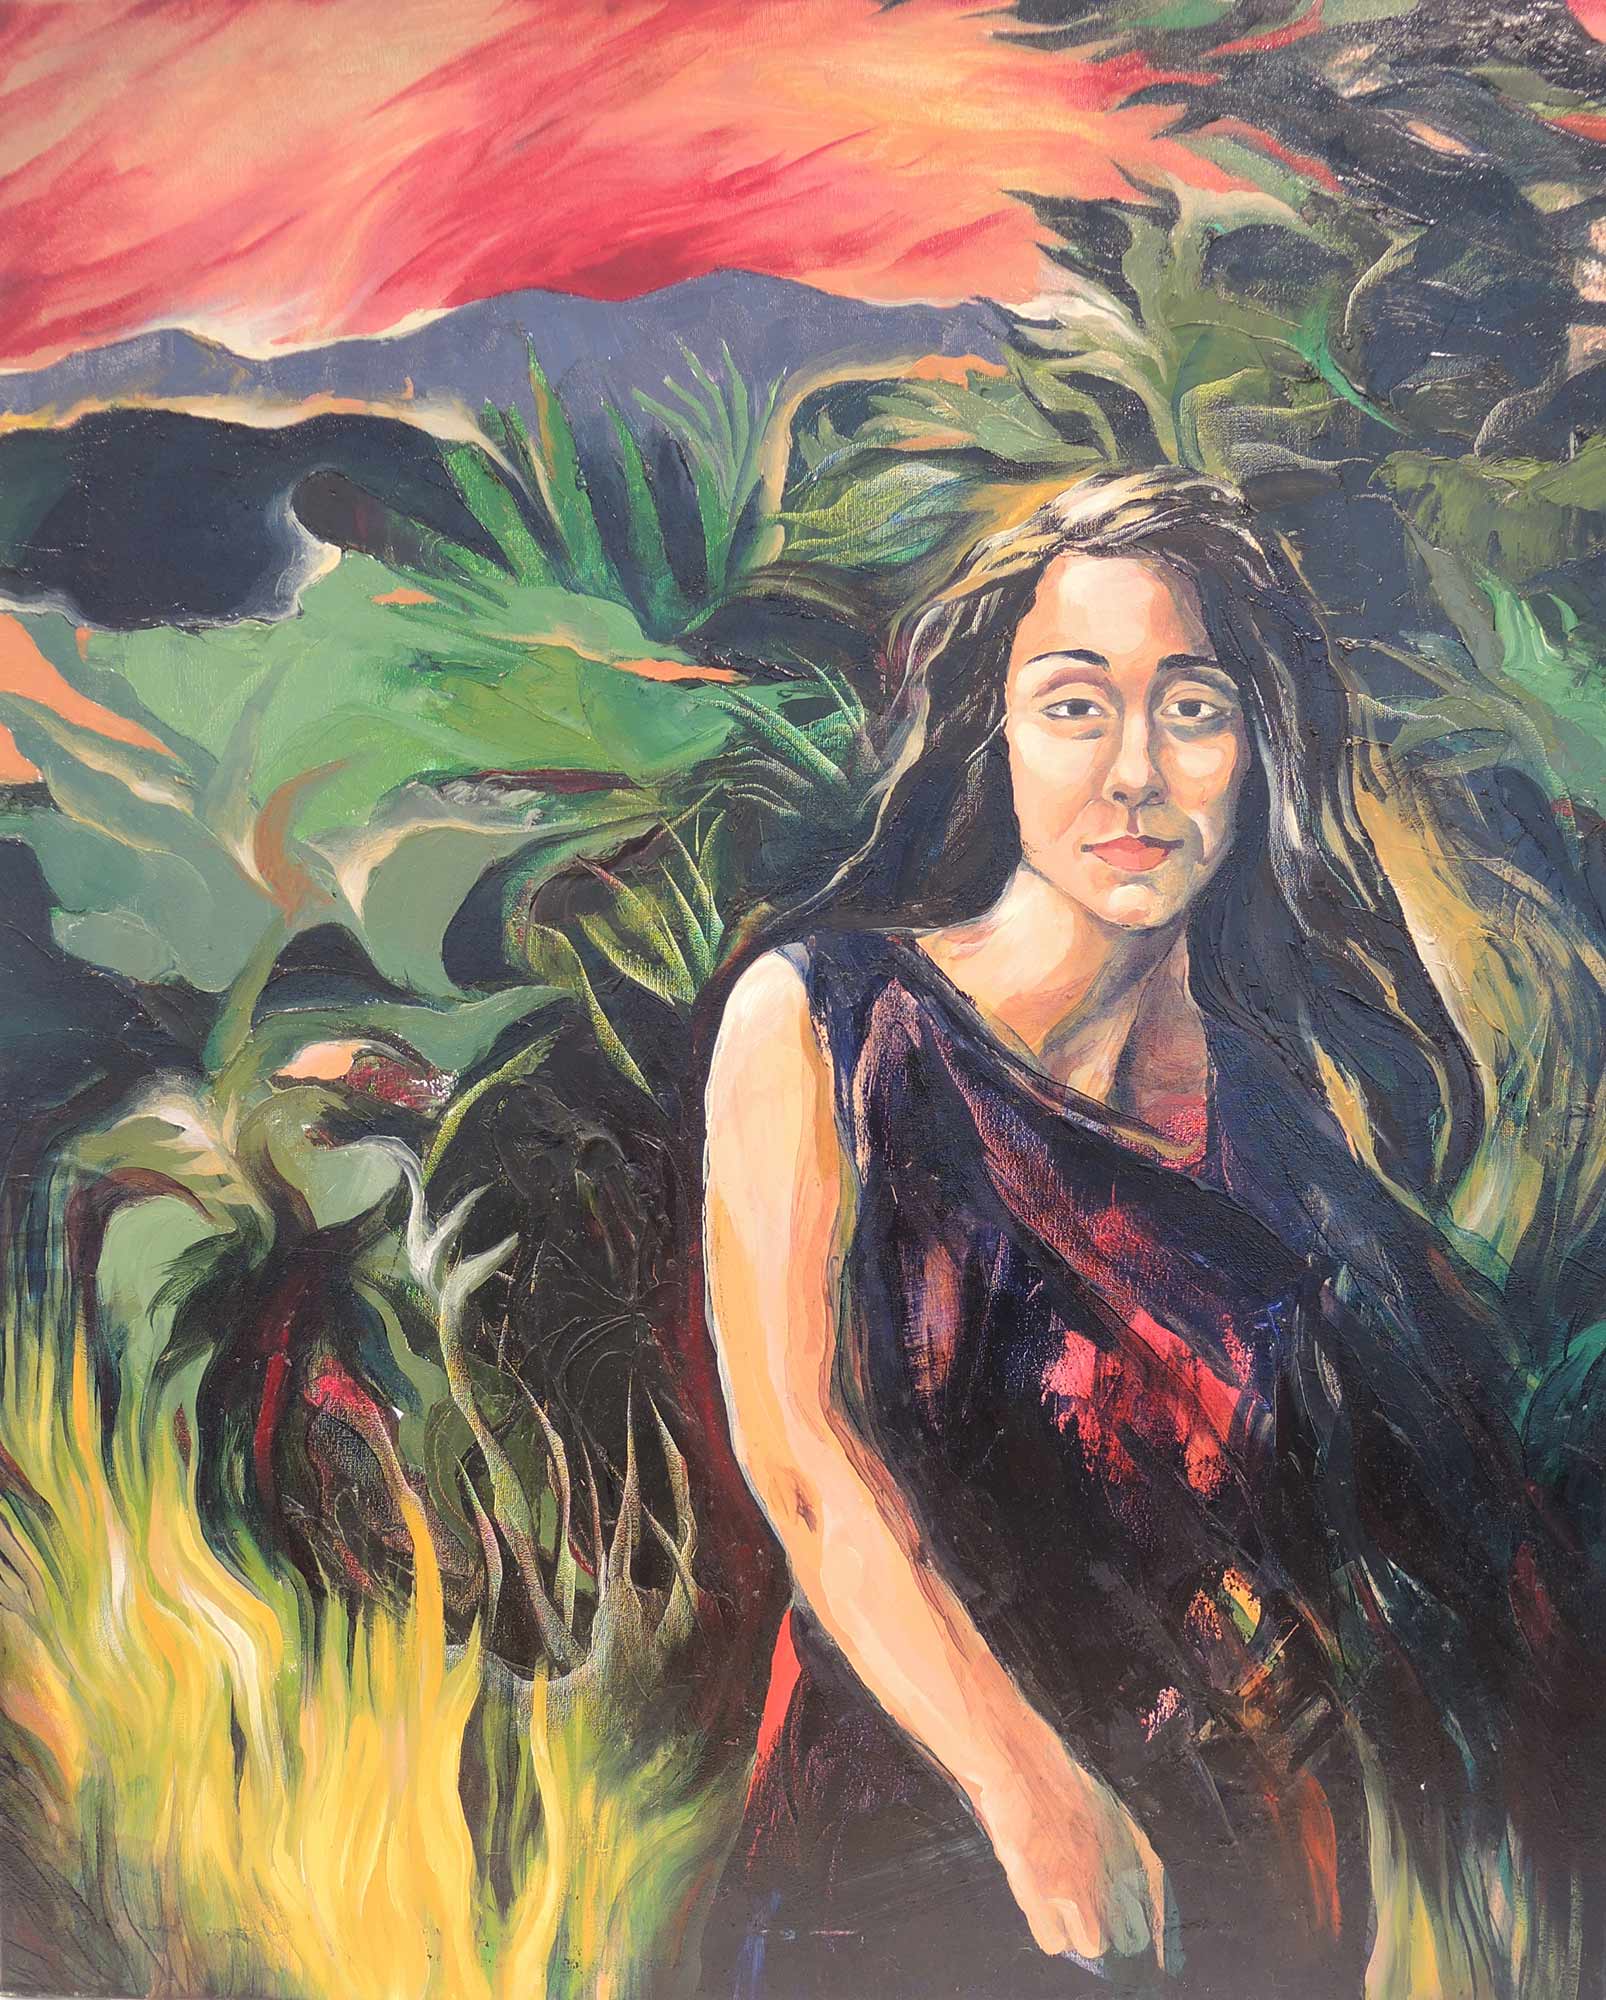 A painting by Oonagh Carroll Warhola of a woman in nature